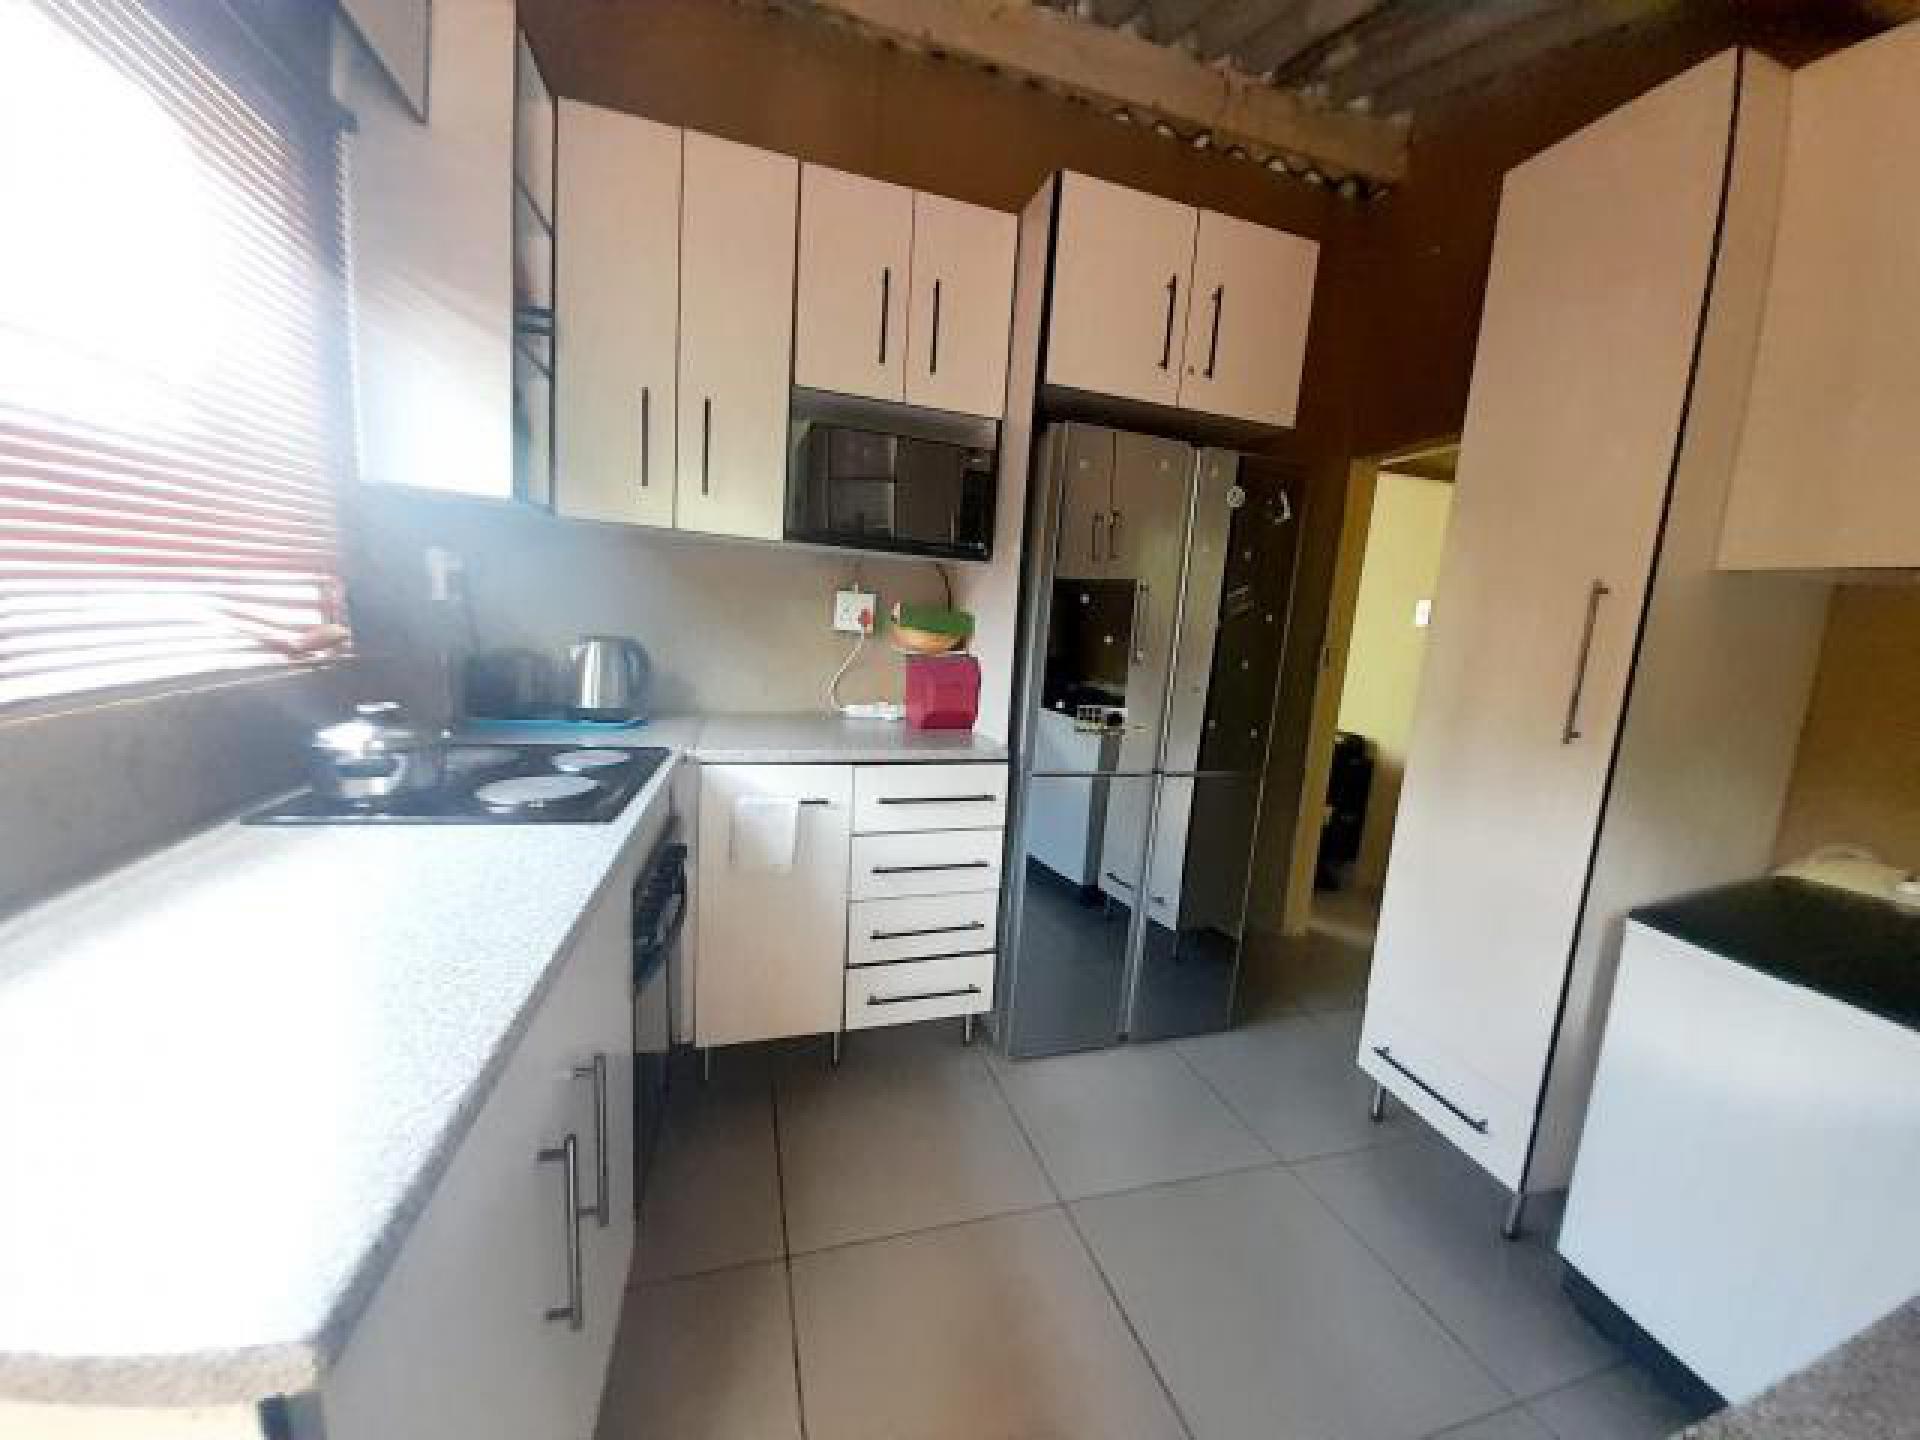 Kitchen of property in Namakgale